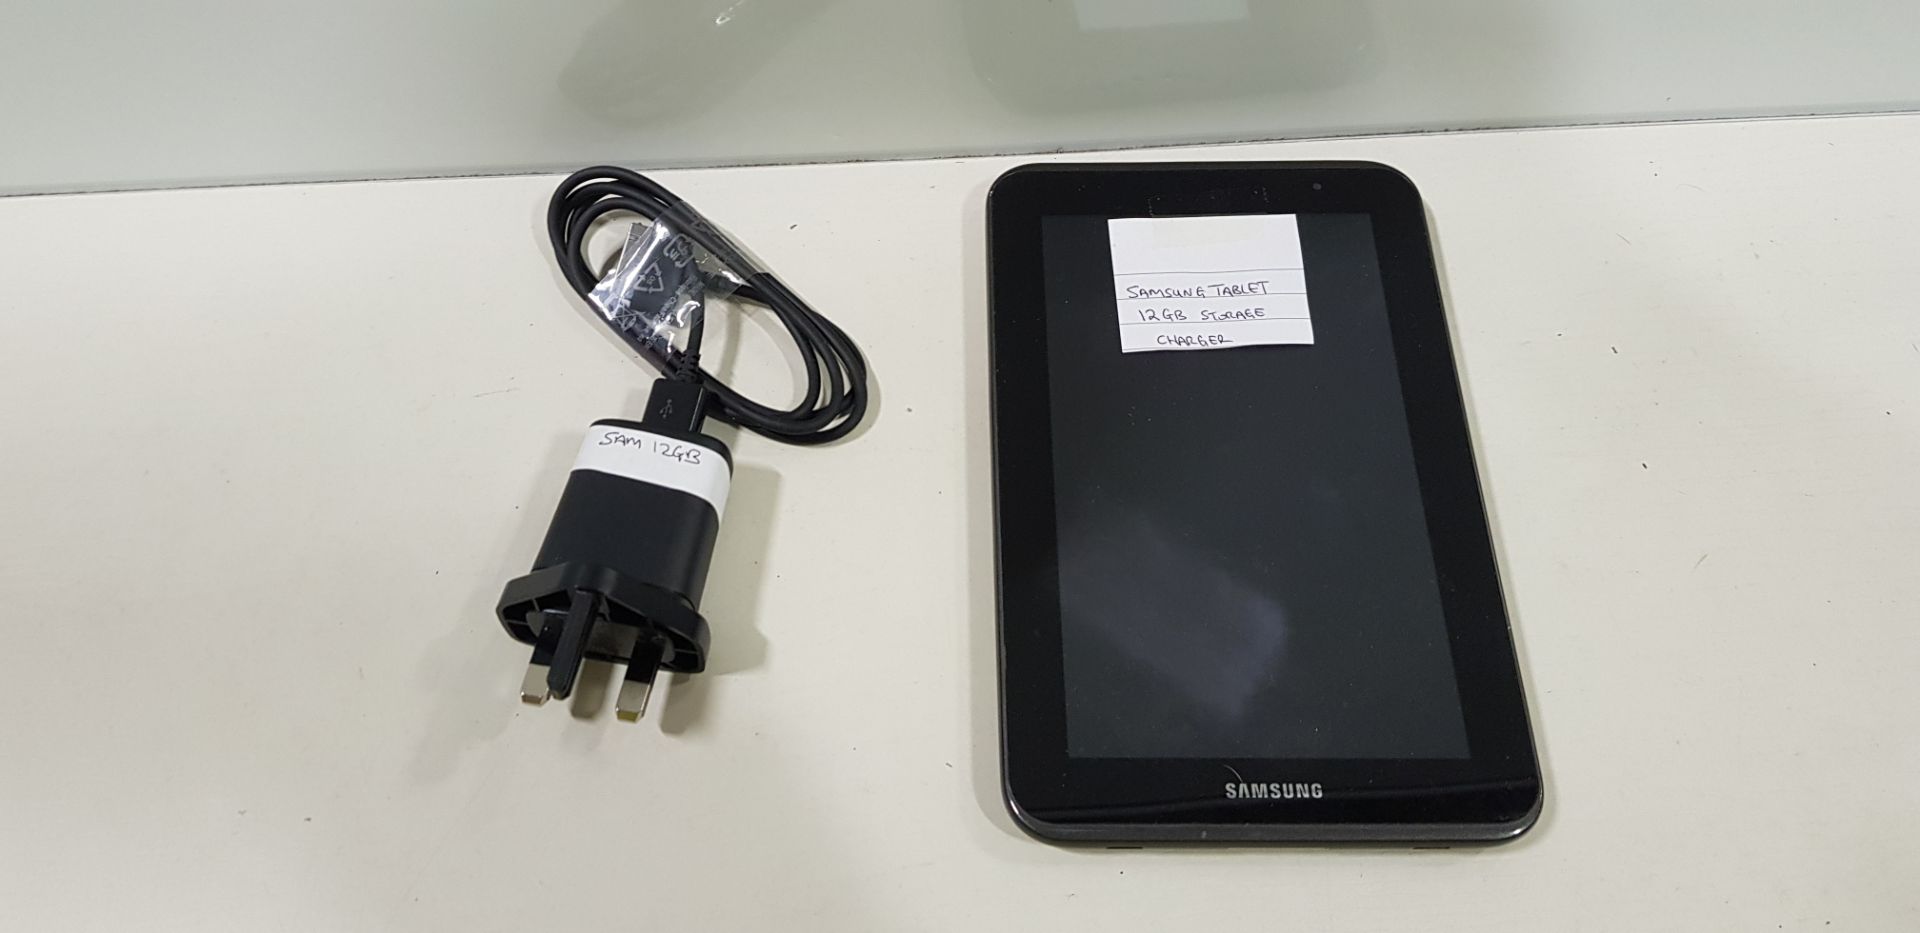 SAMSUNG TABLET 12GB STORAGE - WITH CHARGER